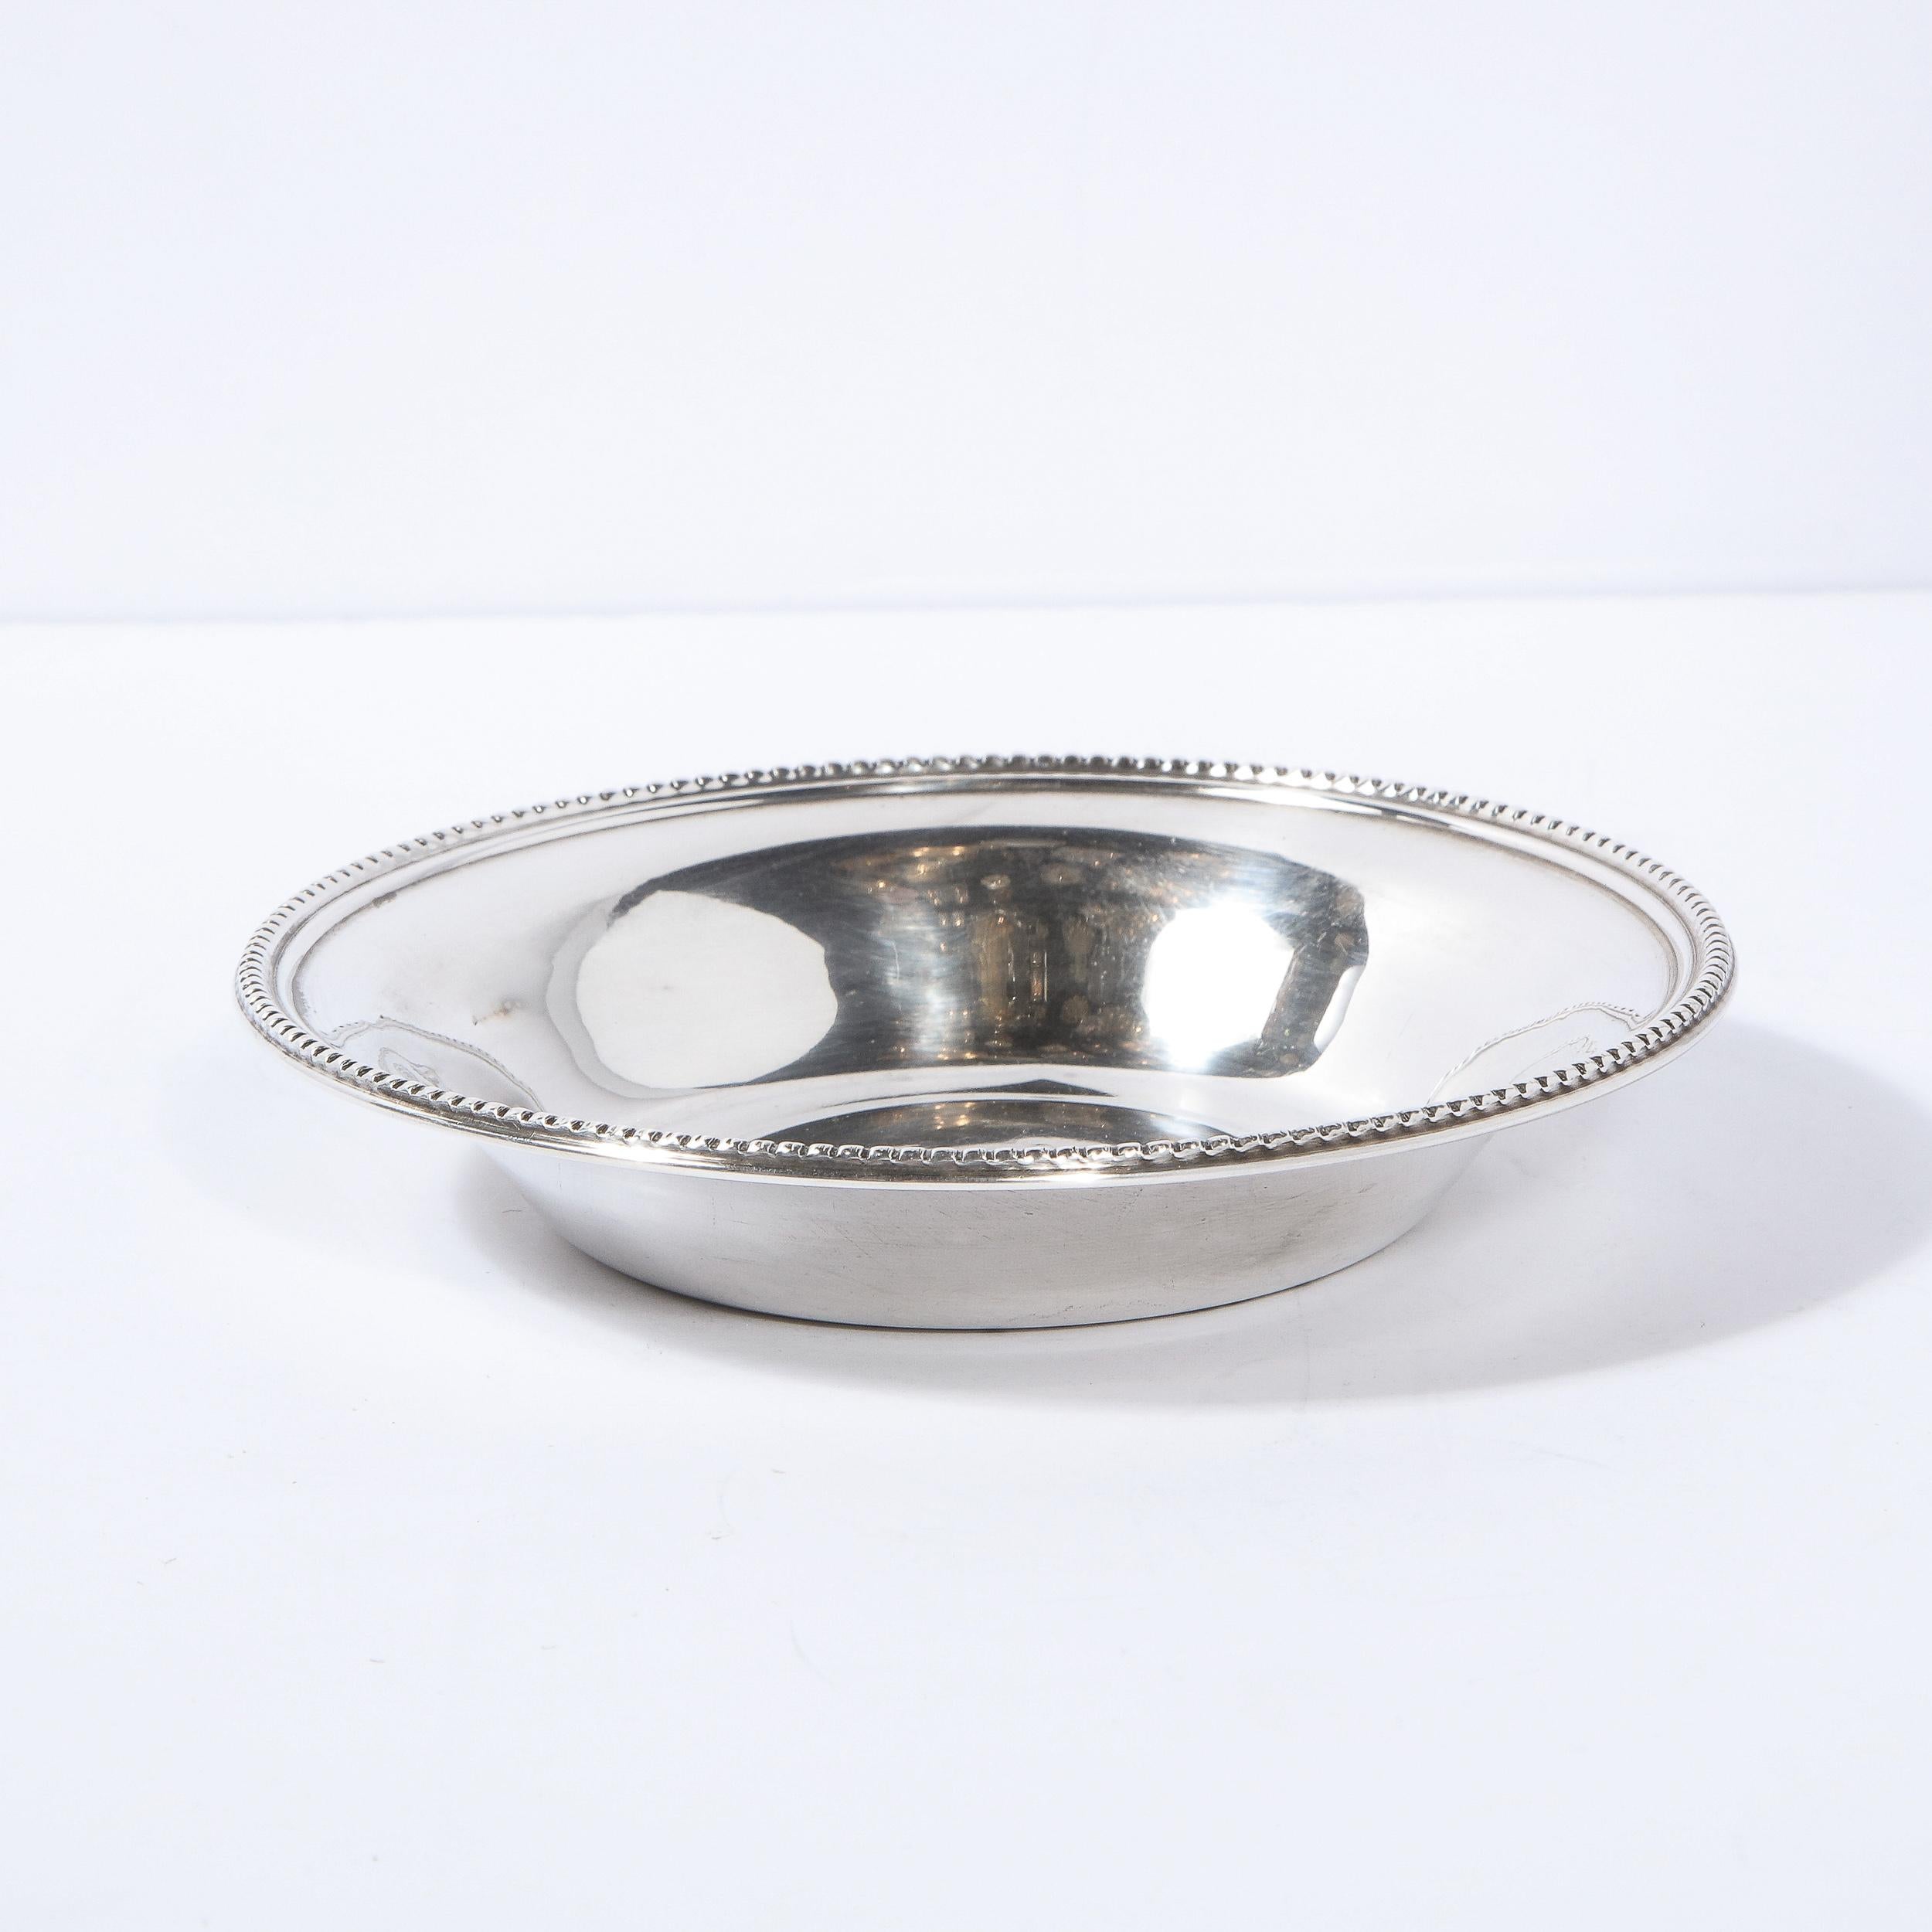 American Mid-Century Modern Sterling Silver Beaded Decorative Dish/ Bowl